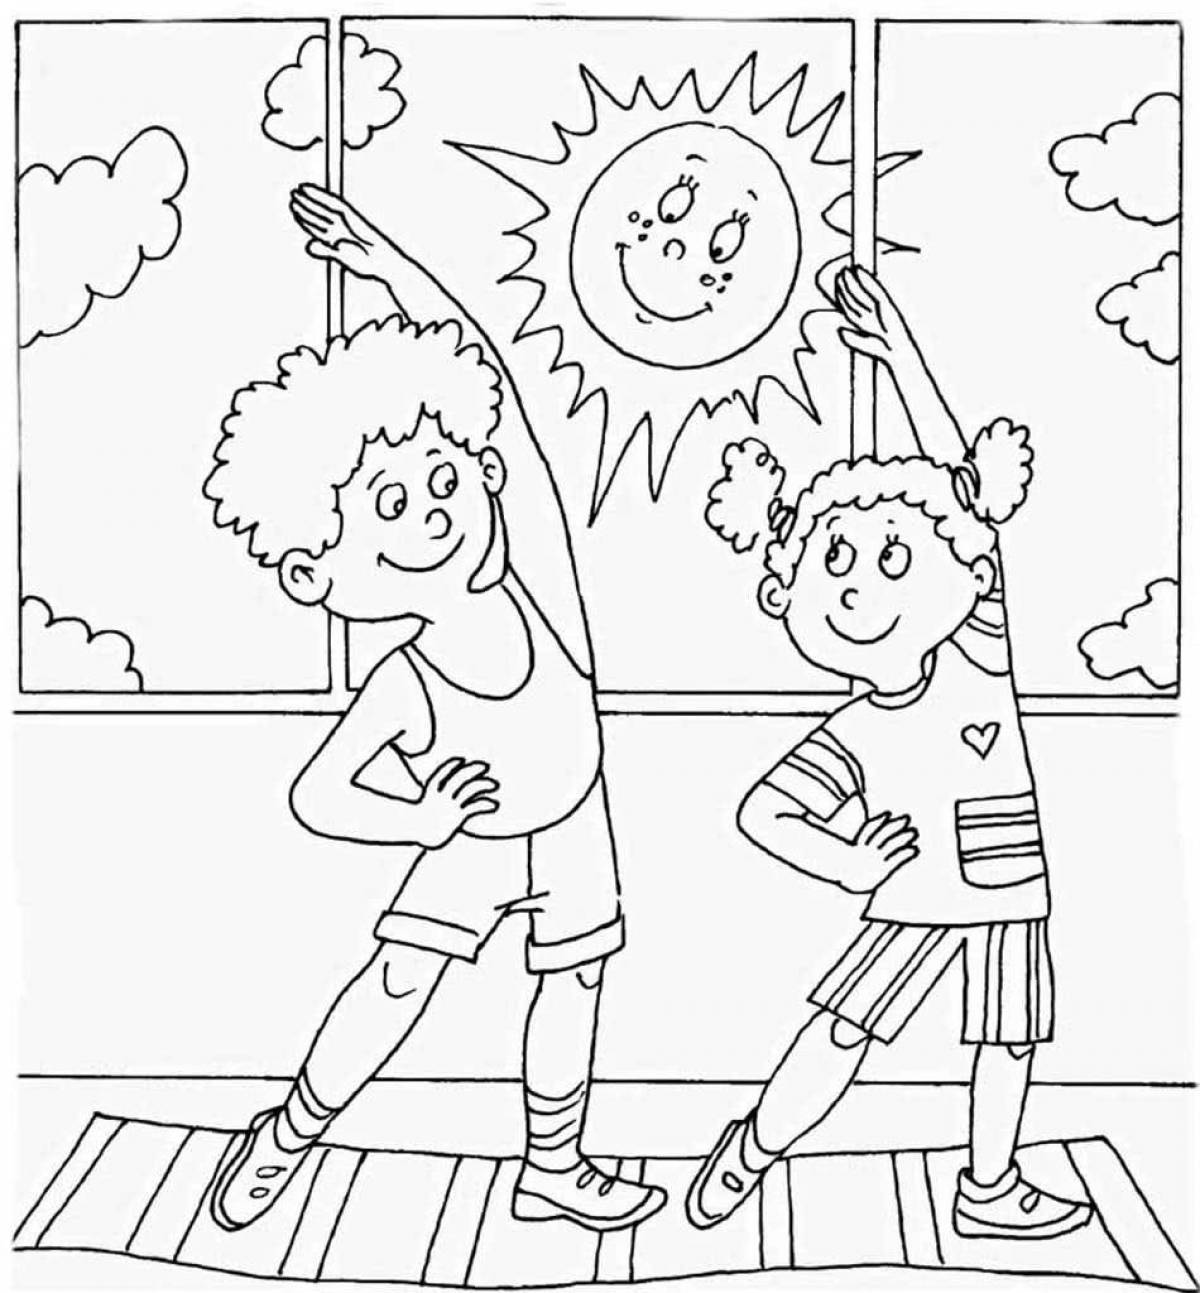 Incredible coloring page turn it on